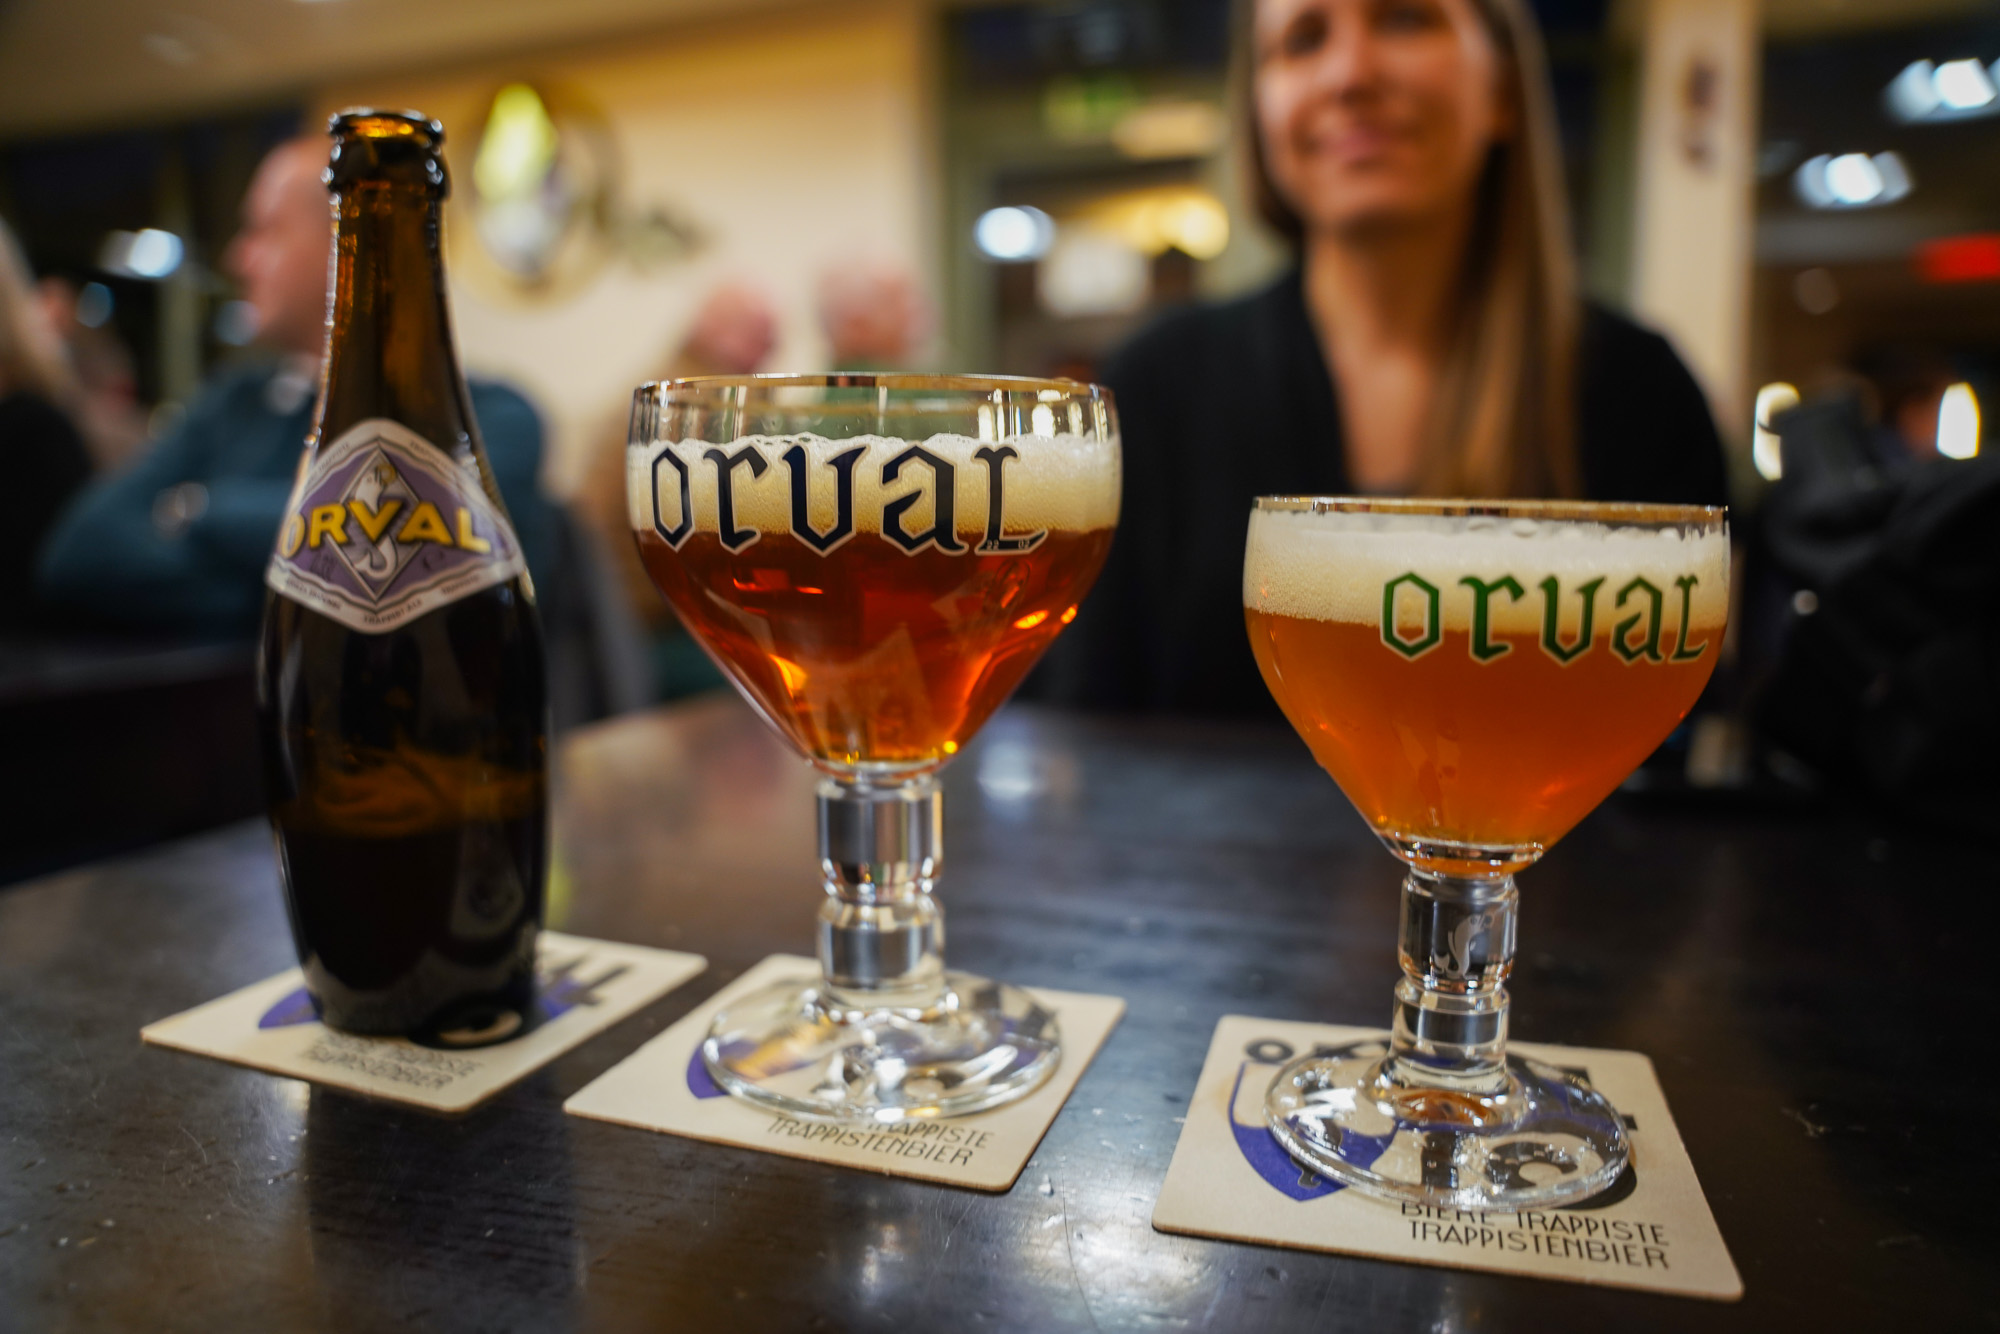 Orval and Orval Vert at A l'Ange Gardien